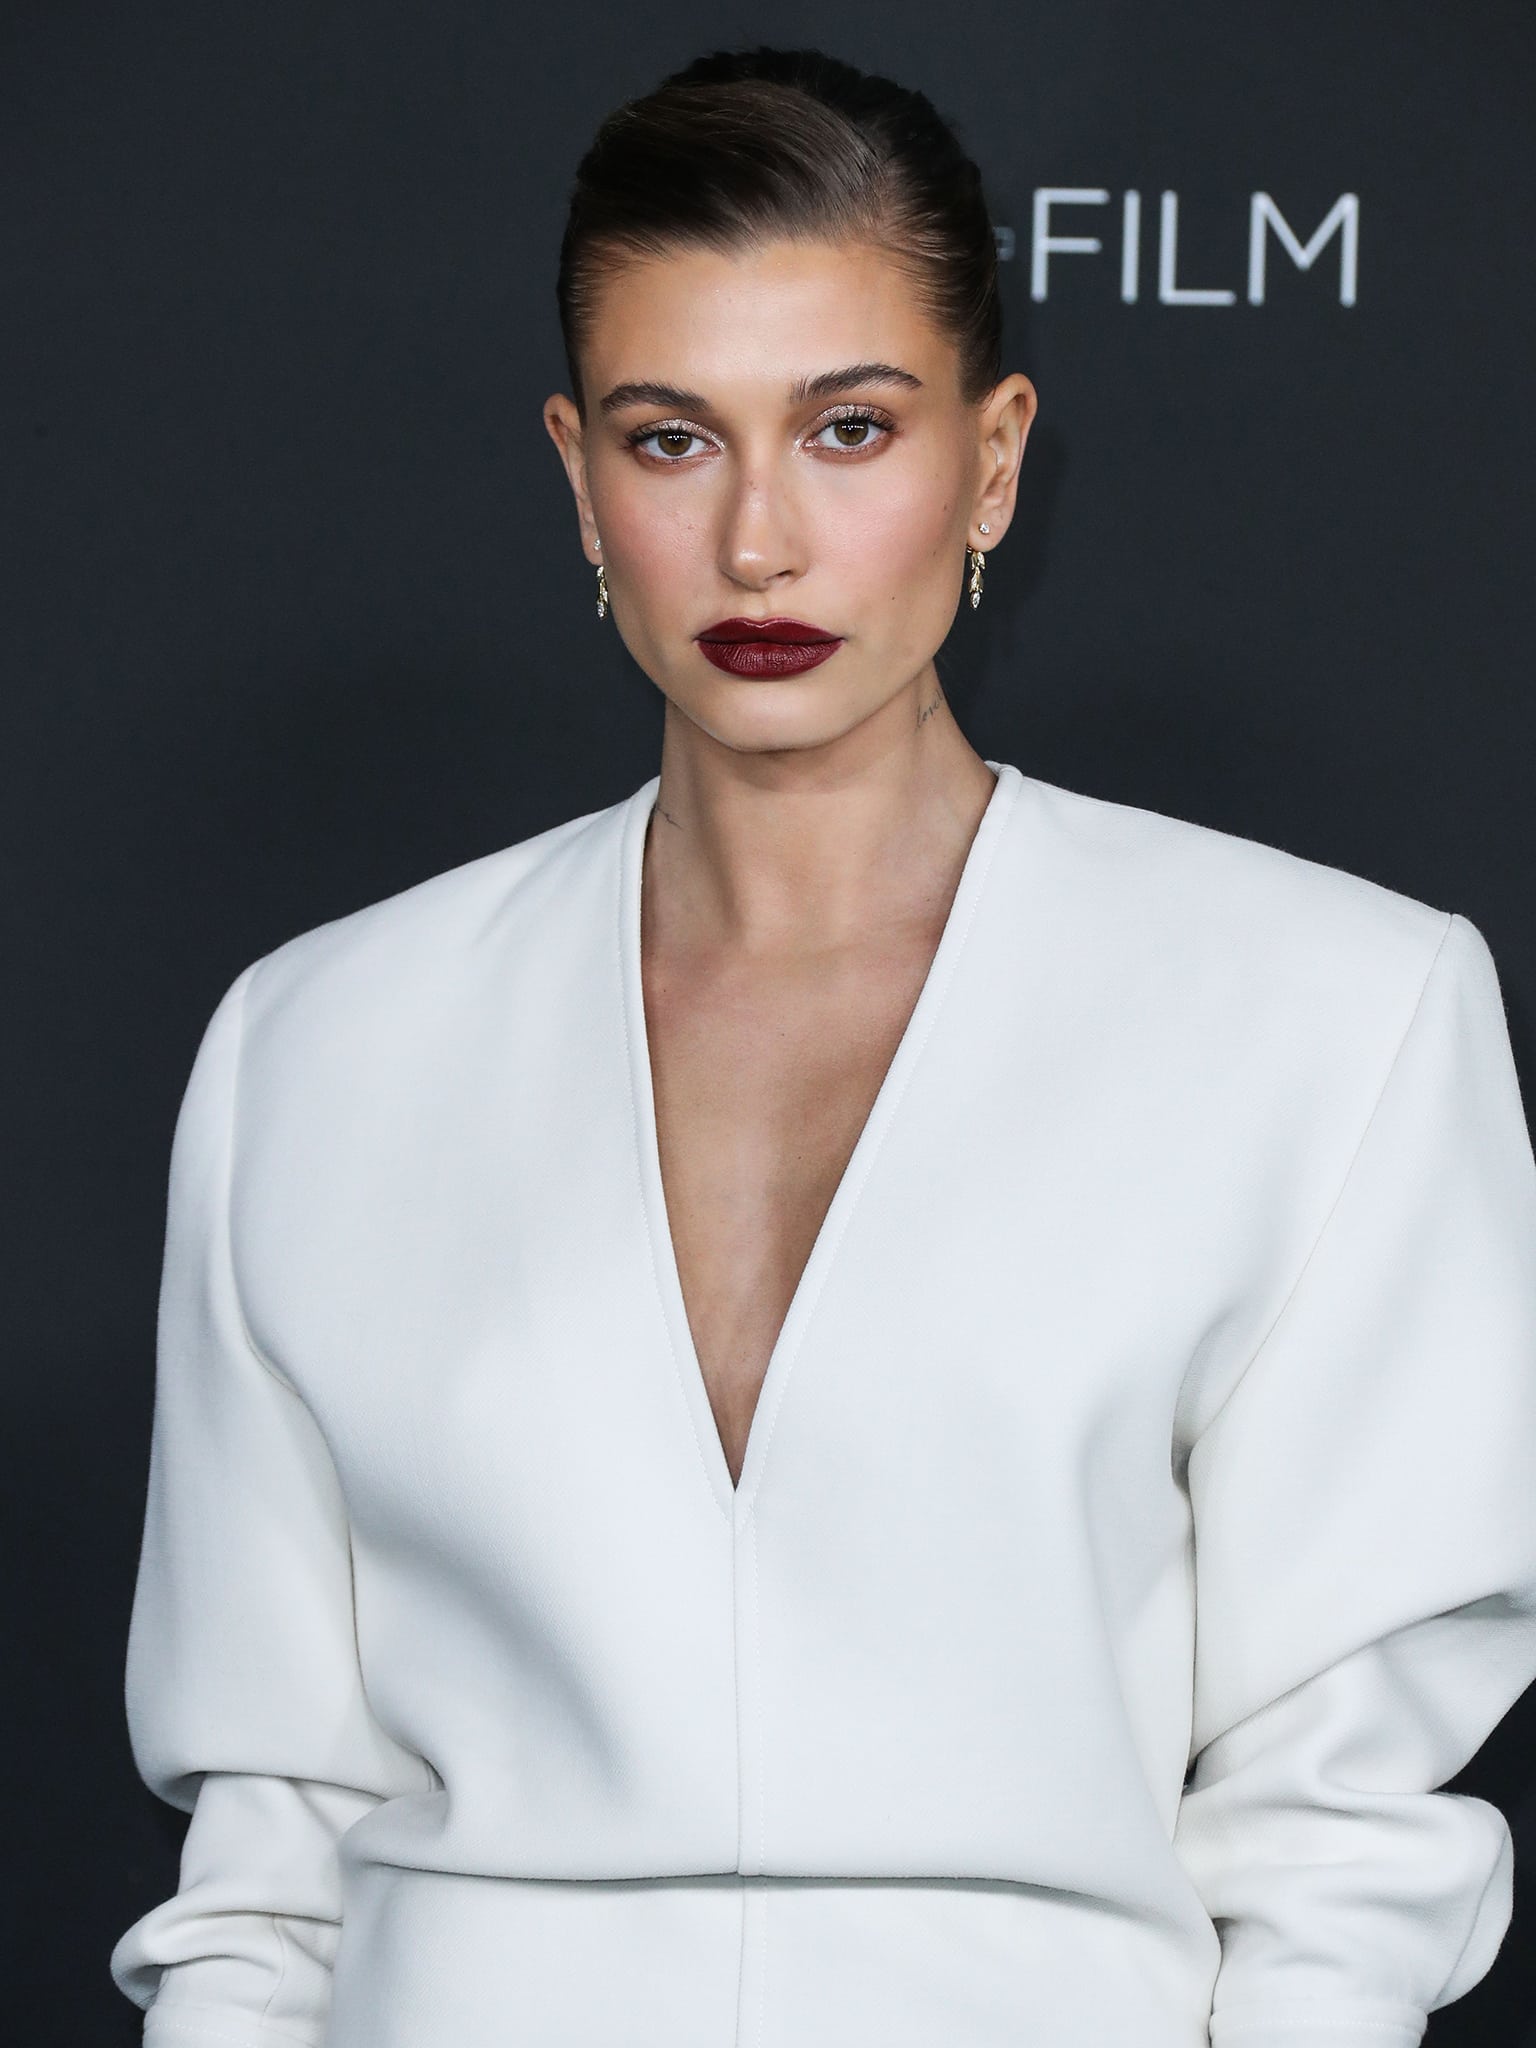 Hailey Bieber wears minimal makeup with bold maroon lipstick and shimmering eyeshadow